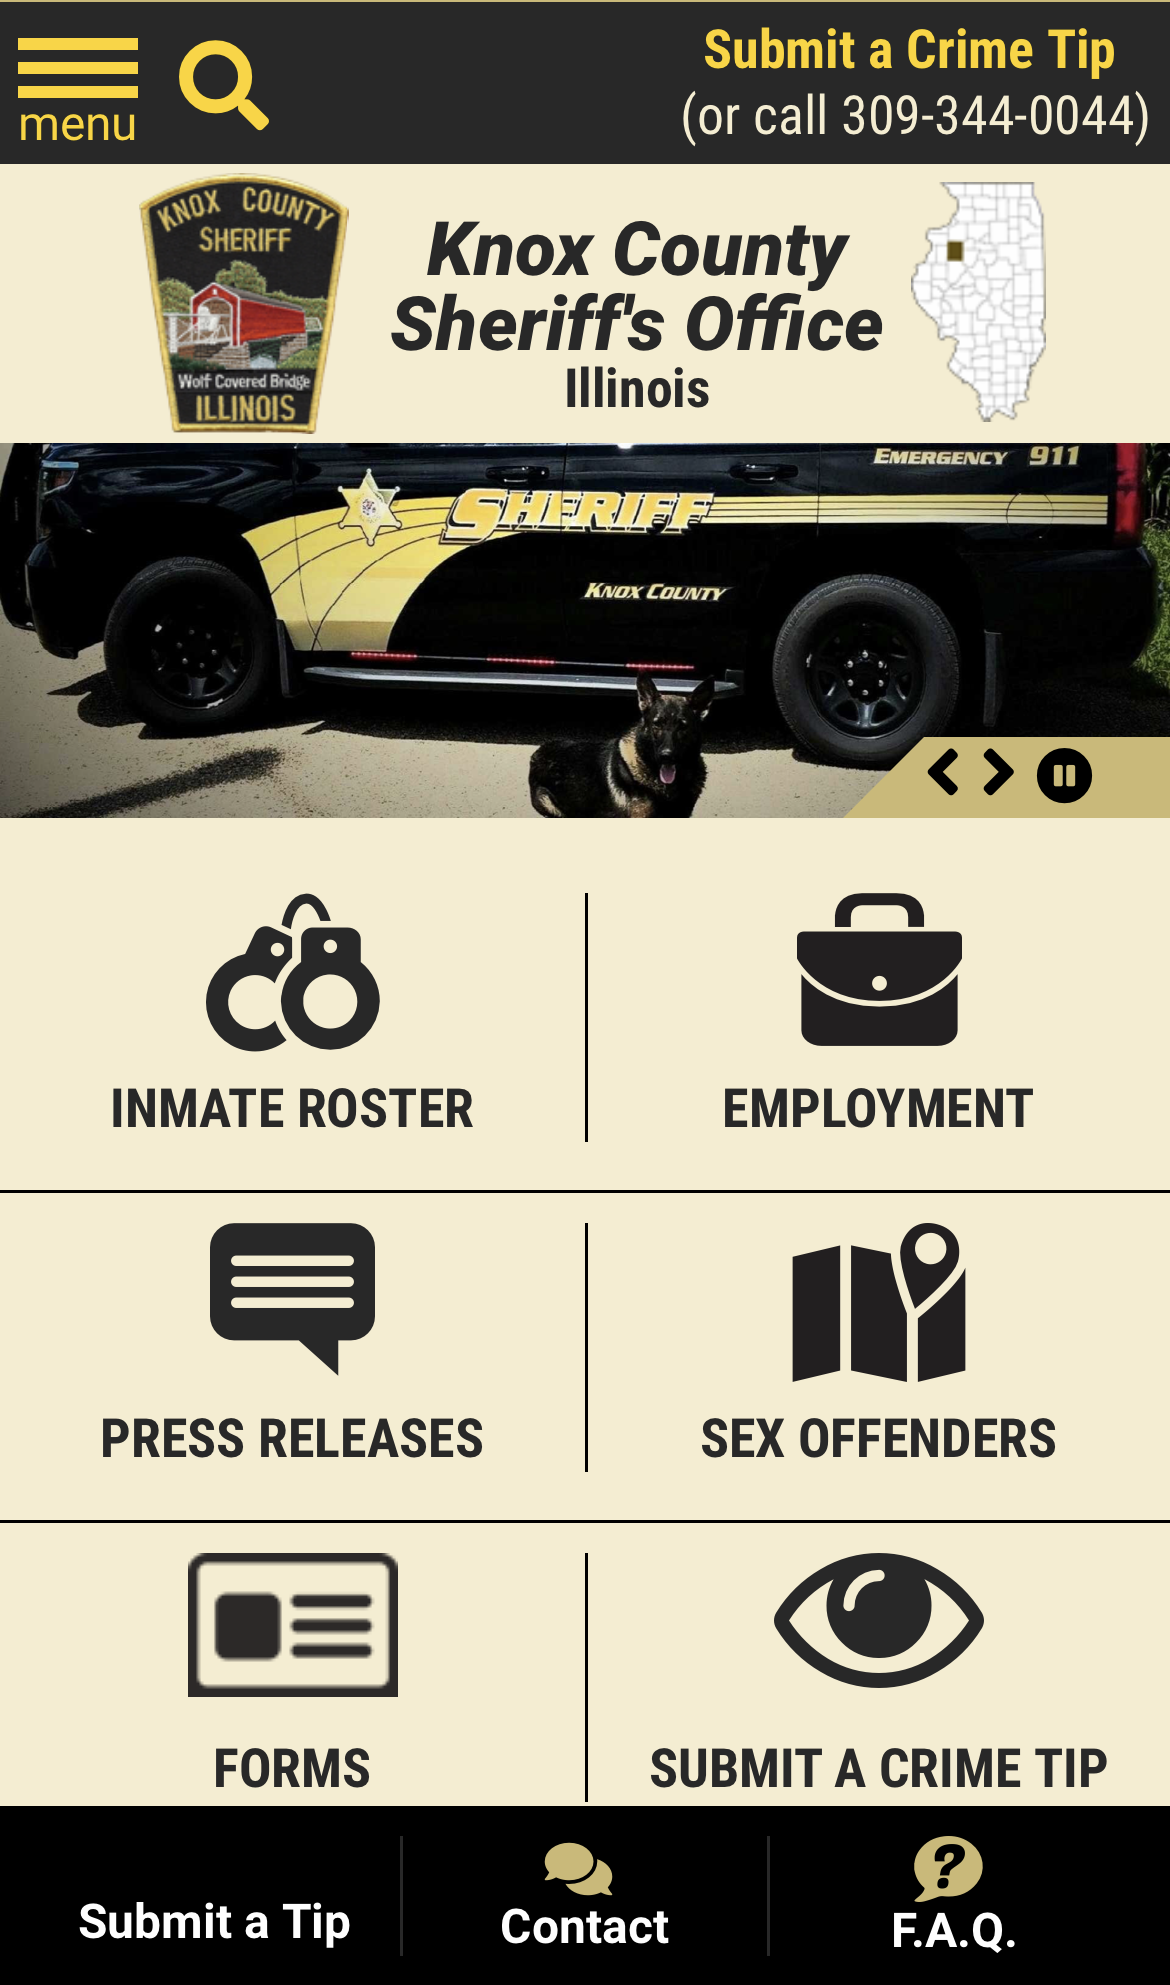 The Knox County Sheriff's Office launched a new responsive website on June 15, 2022, where residents can find the latest information regarding the operations of the sheriff's office as well as locate area sex offenders.